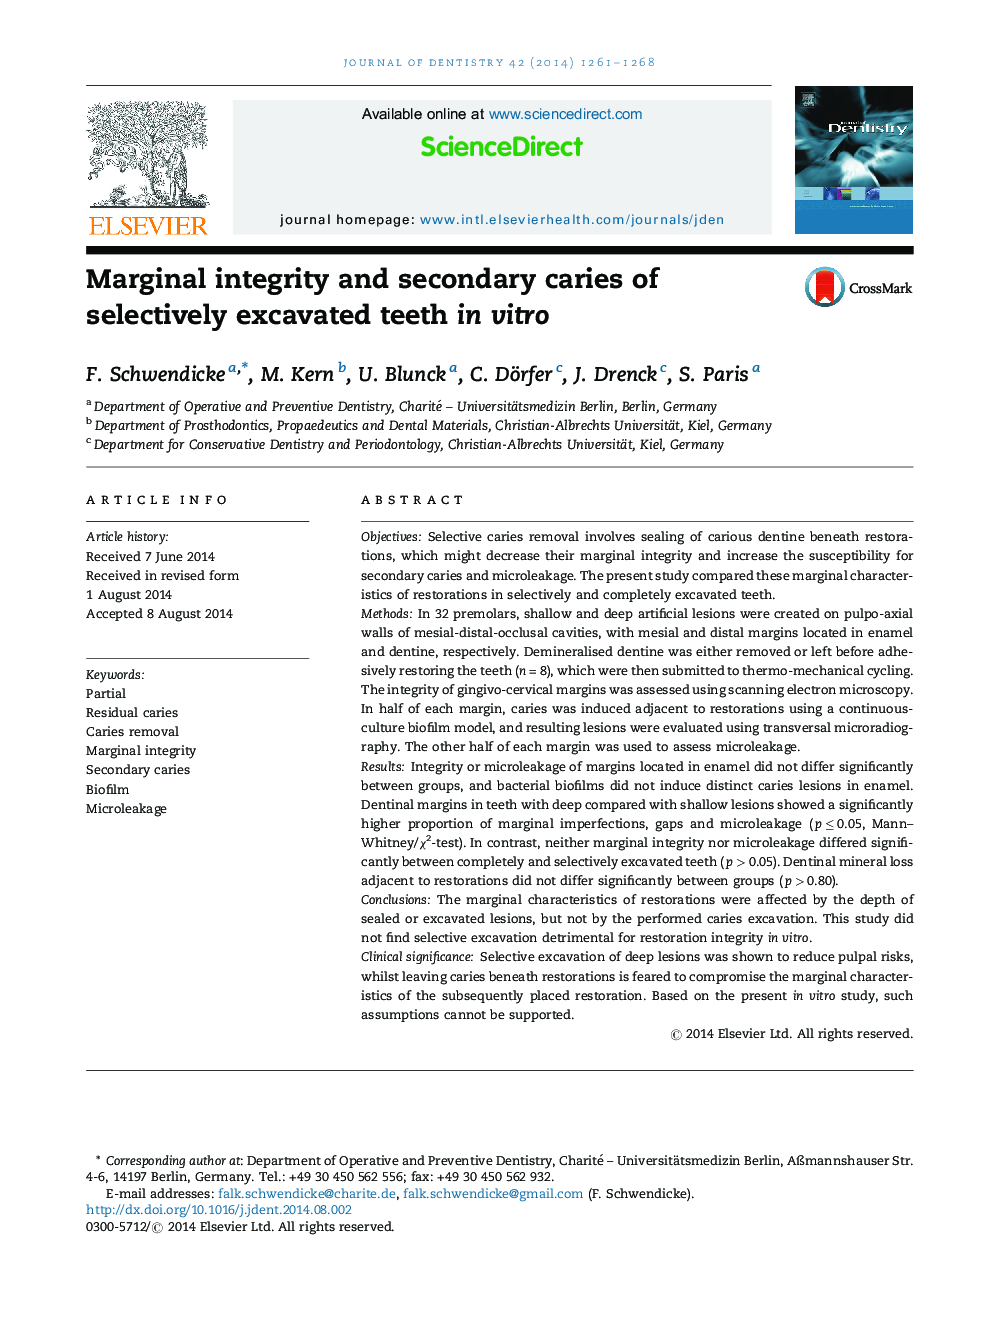 Marginal integrity and secondary caries of selectively excavated teeth in vitro